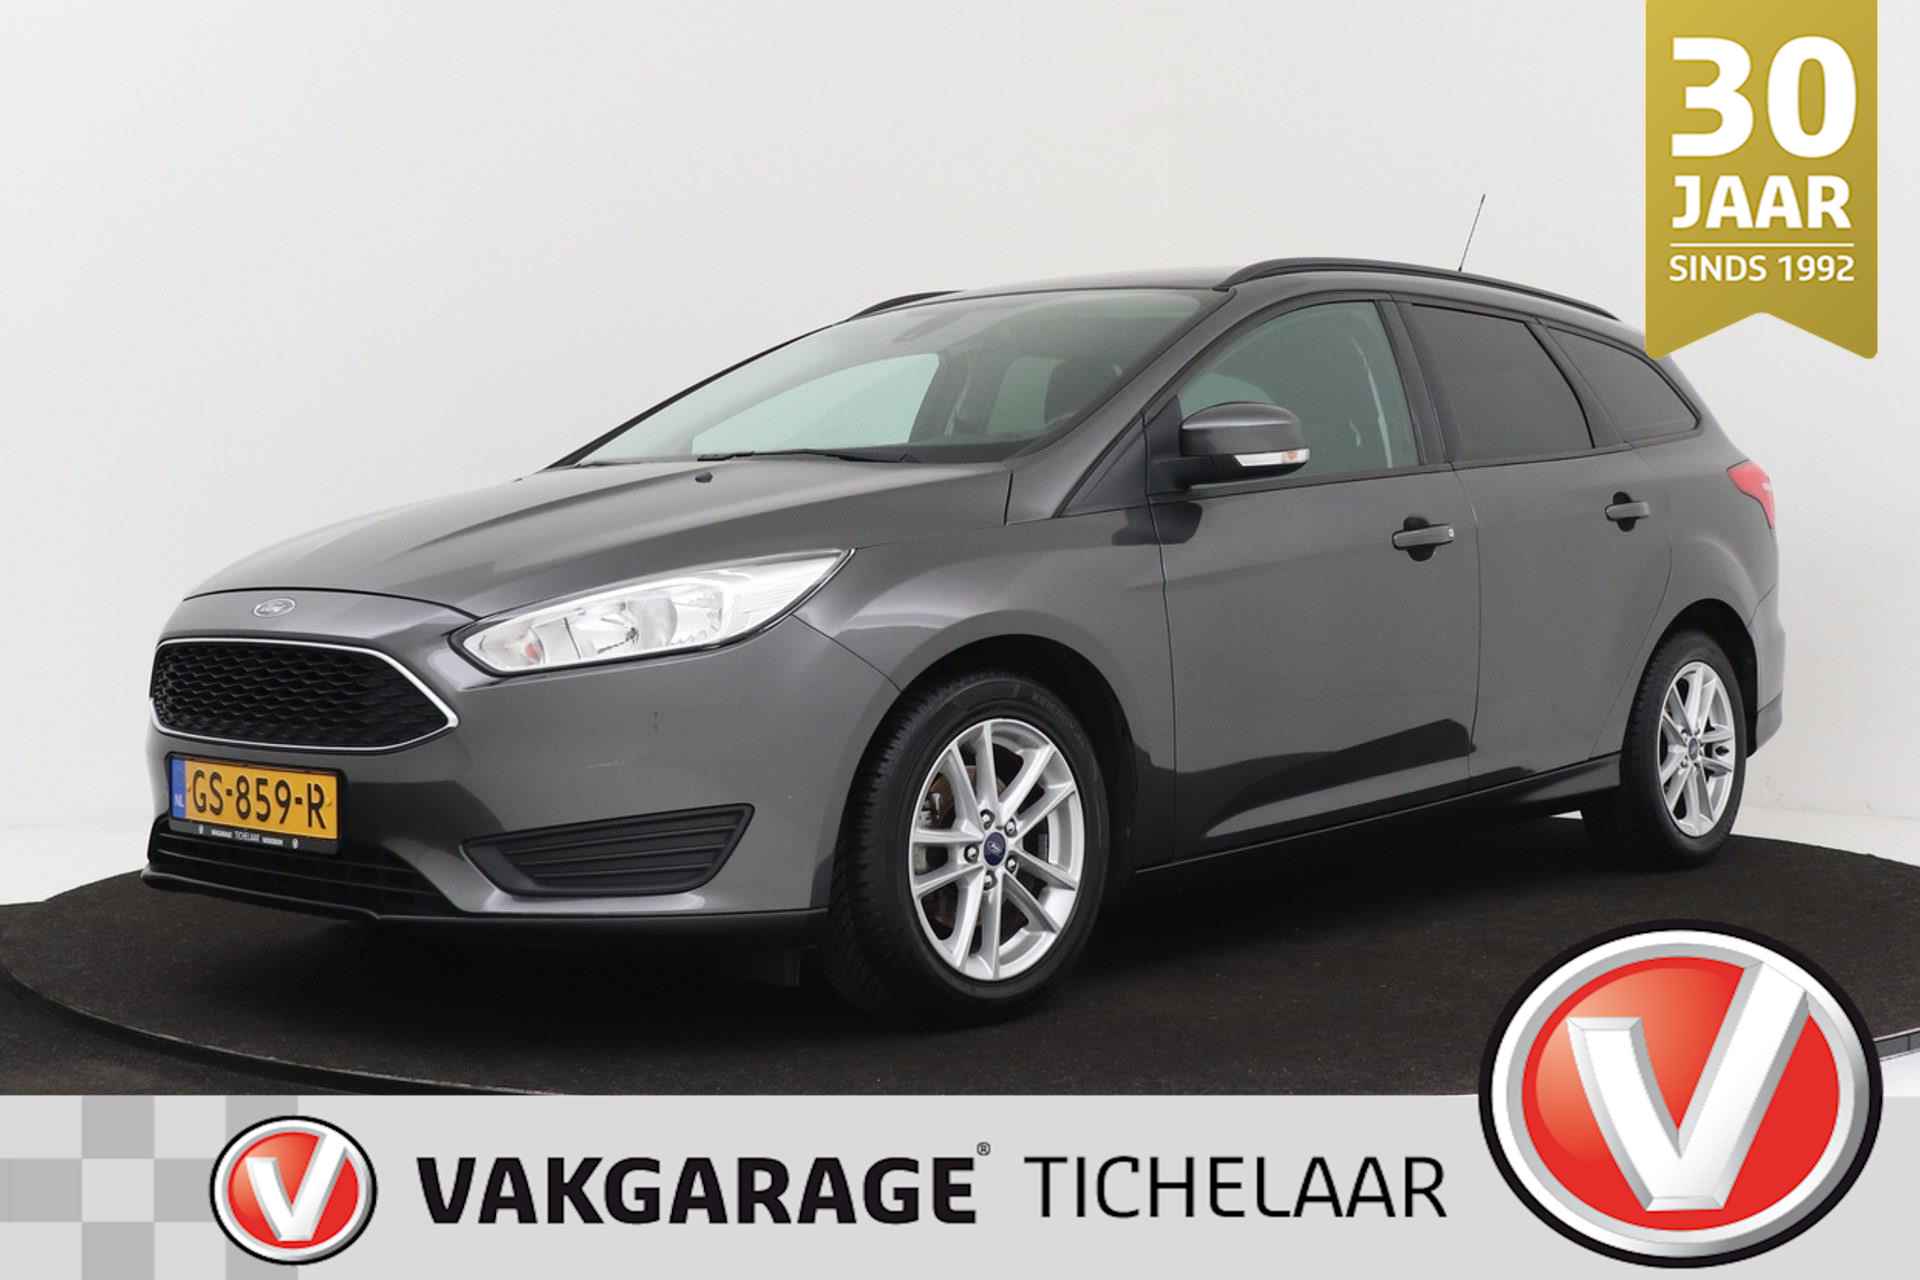 Ford Focus Wagon 1.0 Trend Edition | Org NL | Volledig Ond. | Airco | Cruise Control | - 1/36